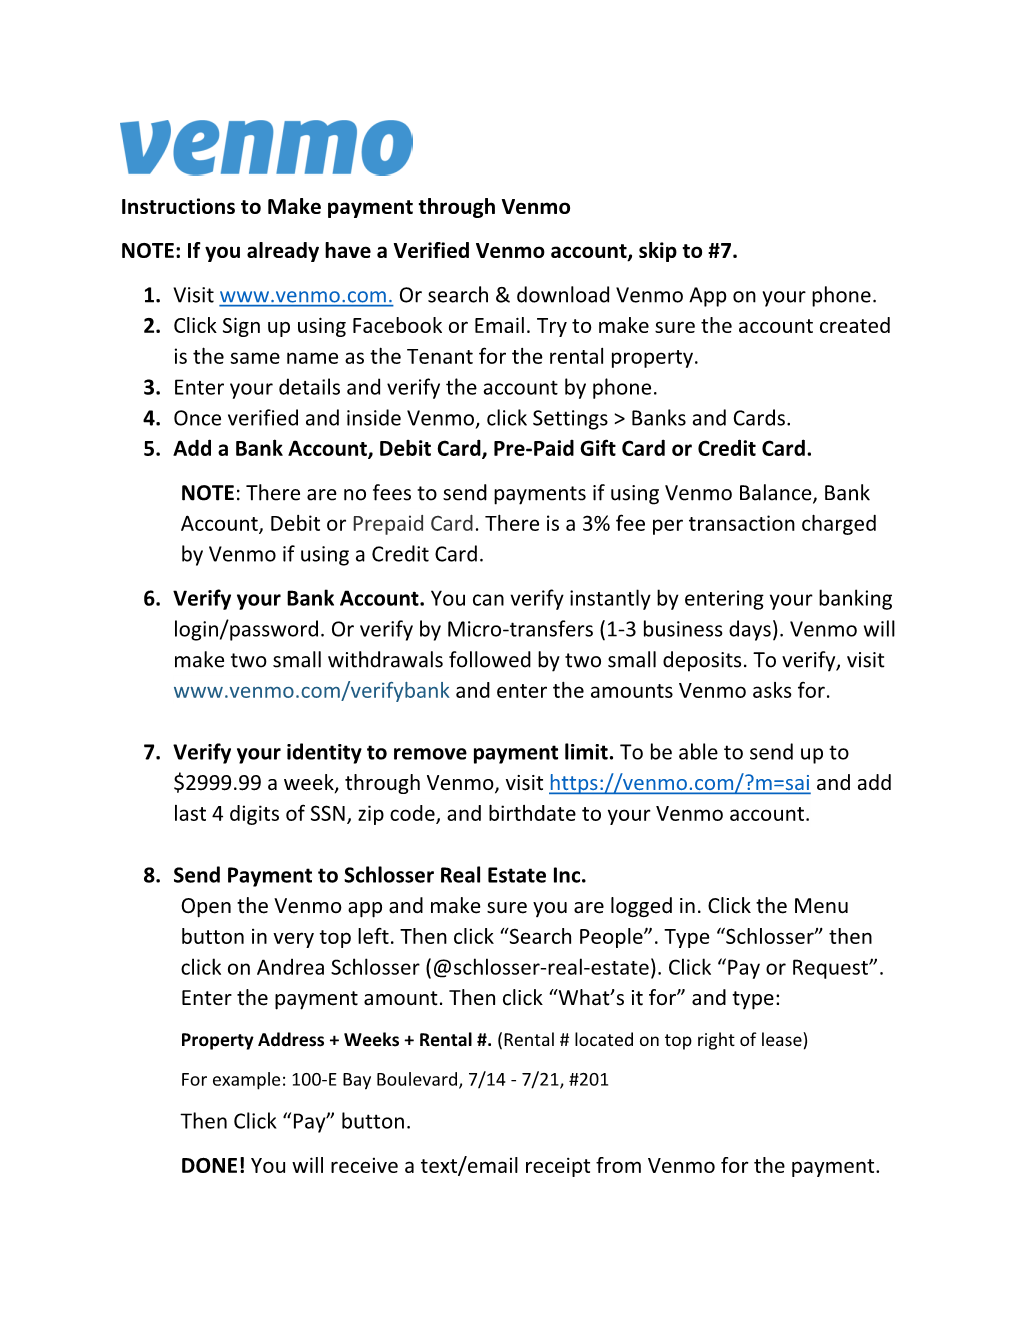 Instructions to Make Payment Through Venmo NOTE: If You Already Have a Verified Venmo Account, Skip to #7